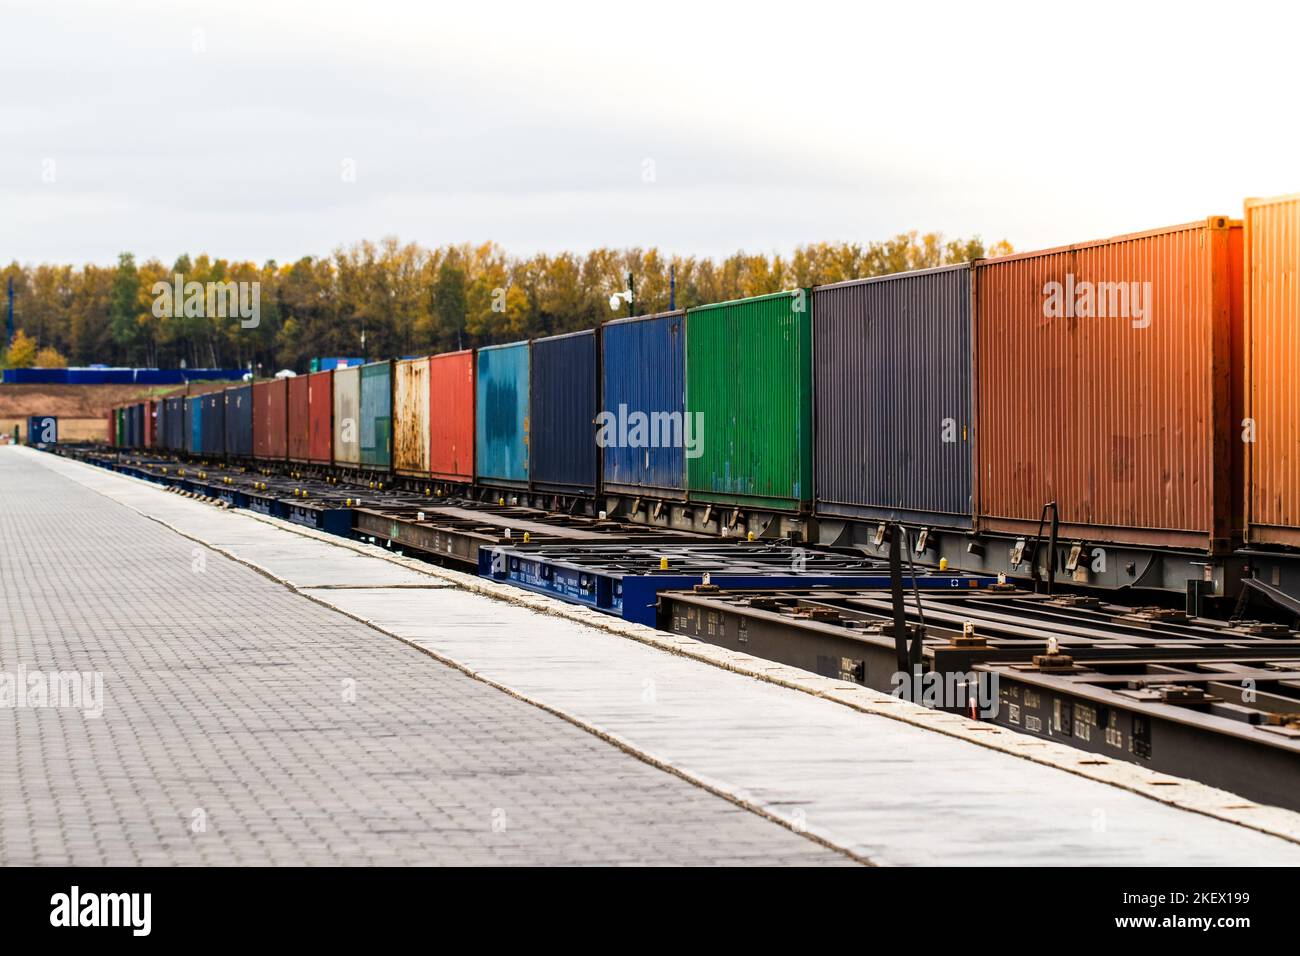 Freight train. Cargo containers transportation by railway. Impoert export logistics concept. Shipping by train. Cargo train platform. Stock Photo